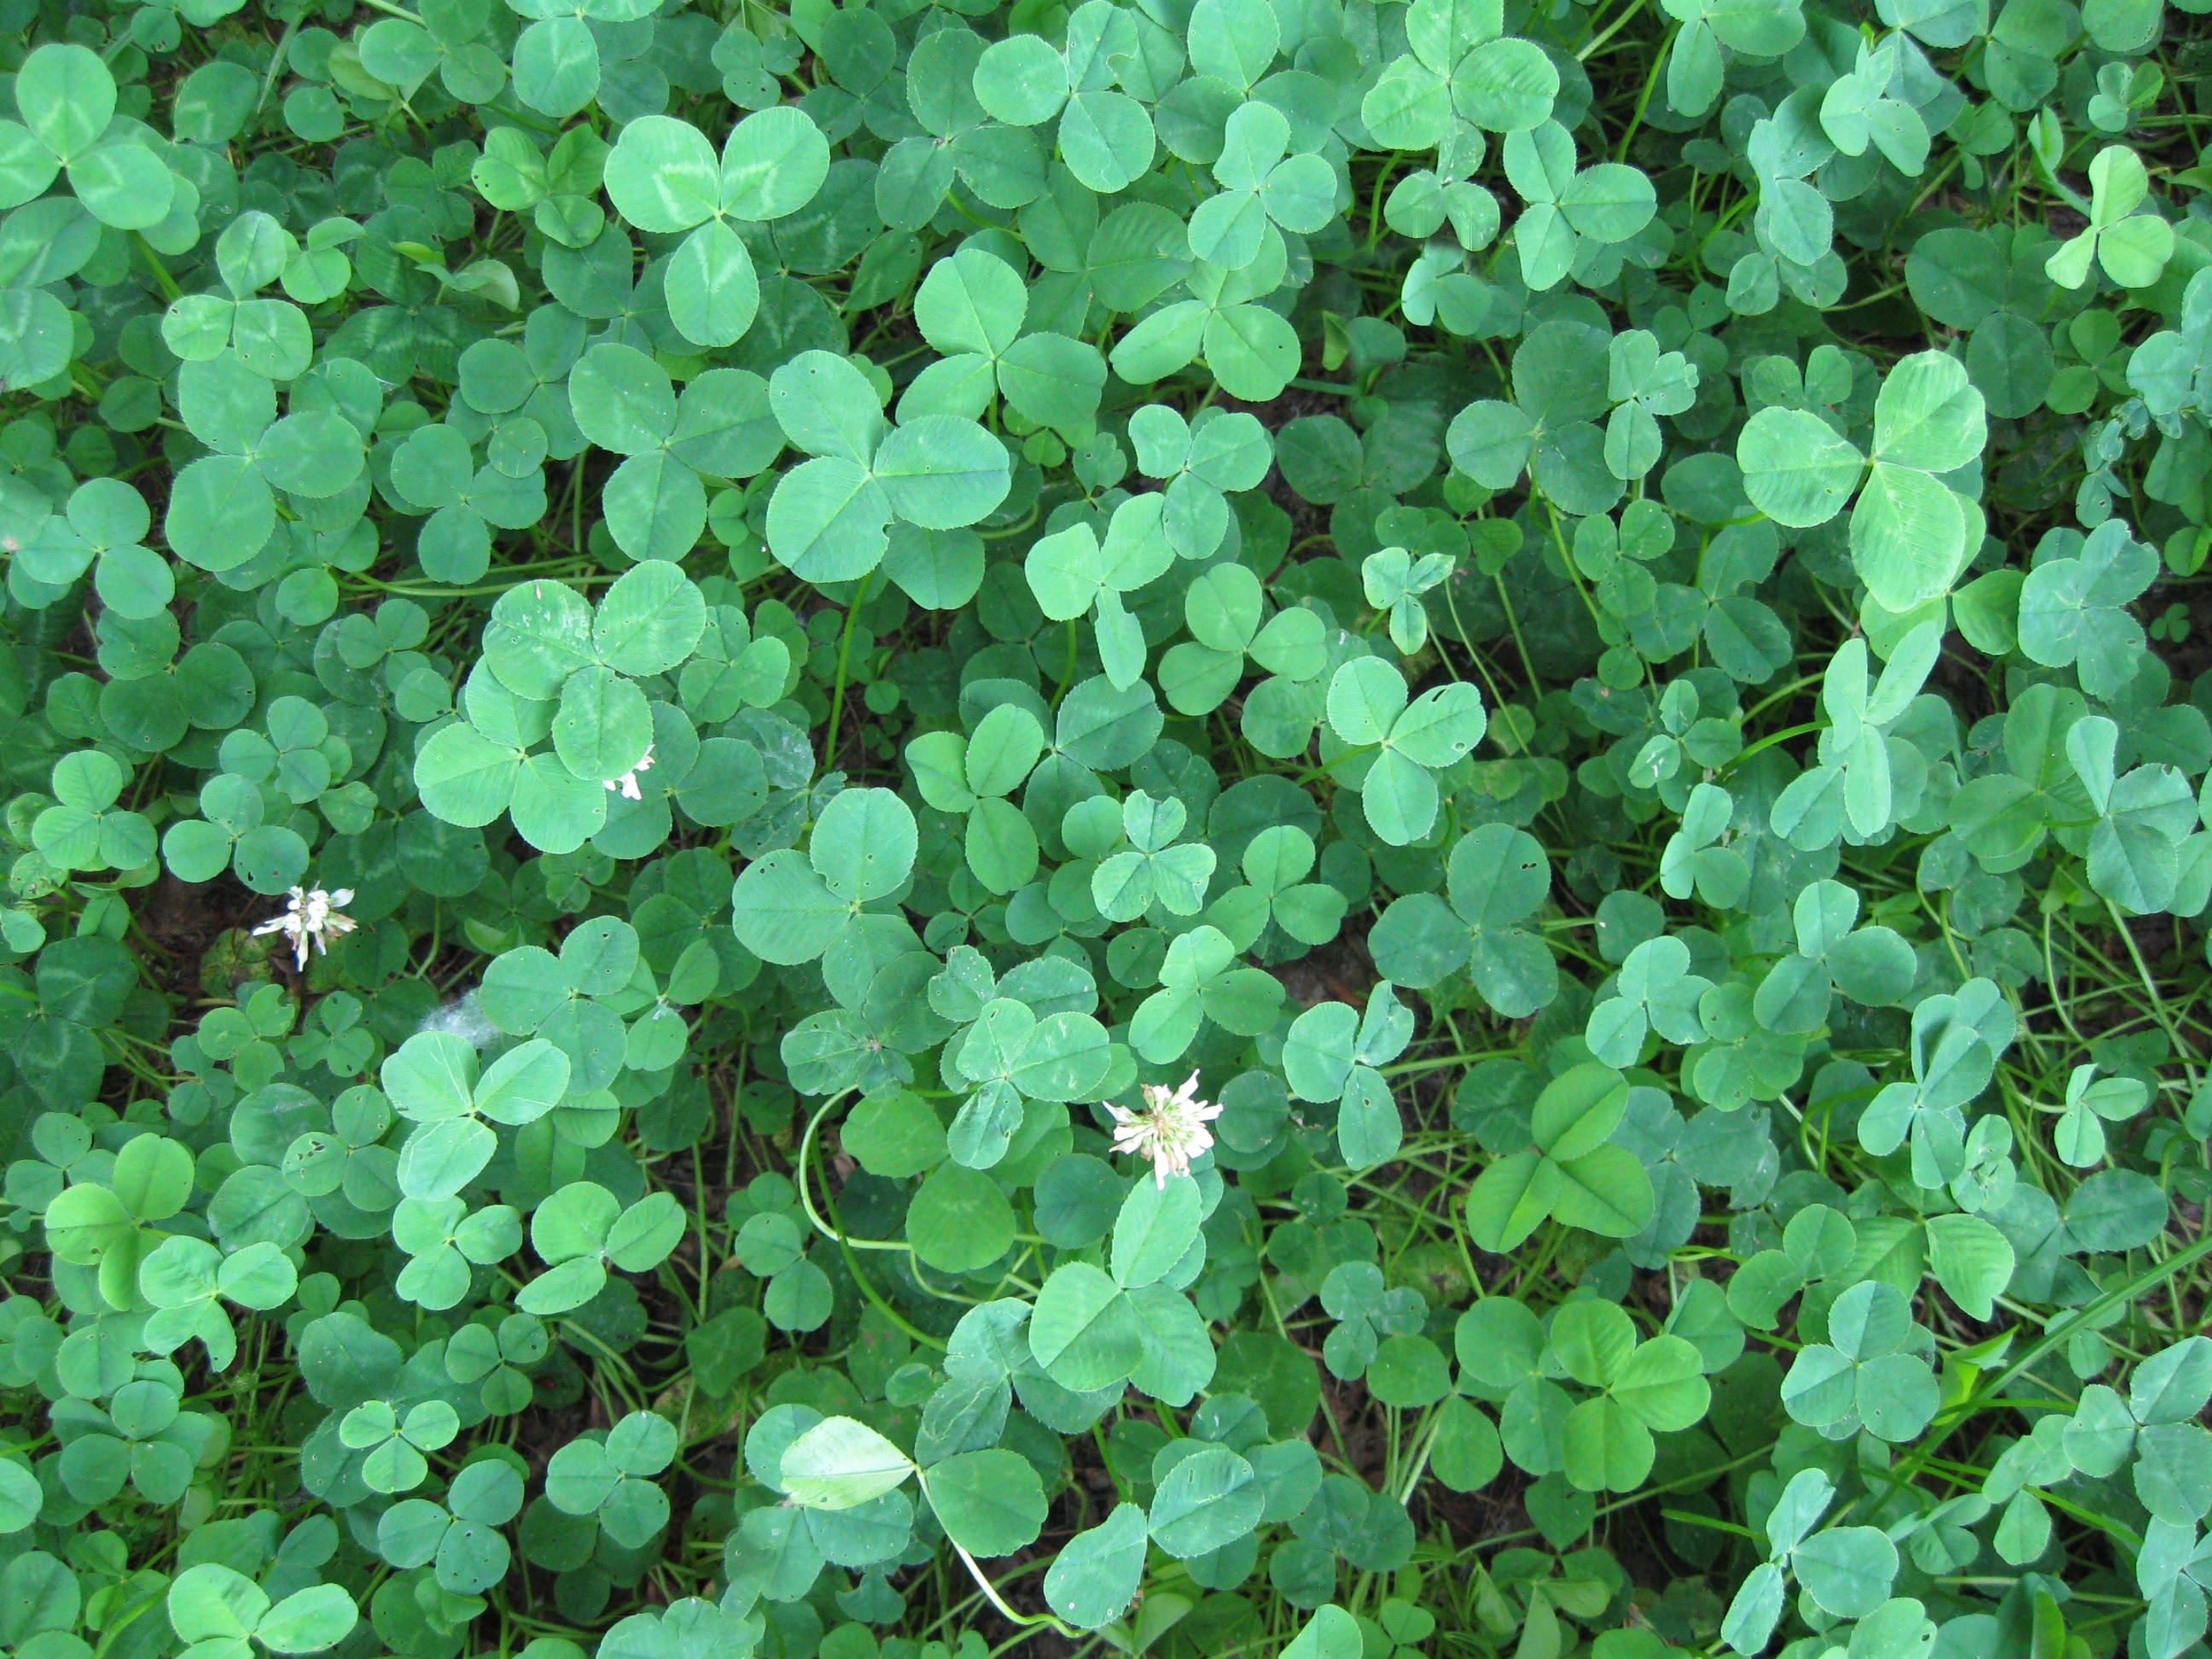 Foliage, Green, Clover, Nature, green color, leaf